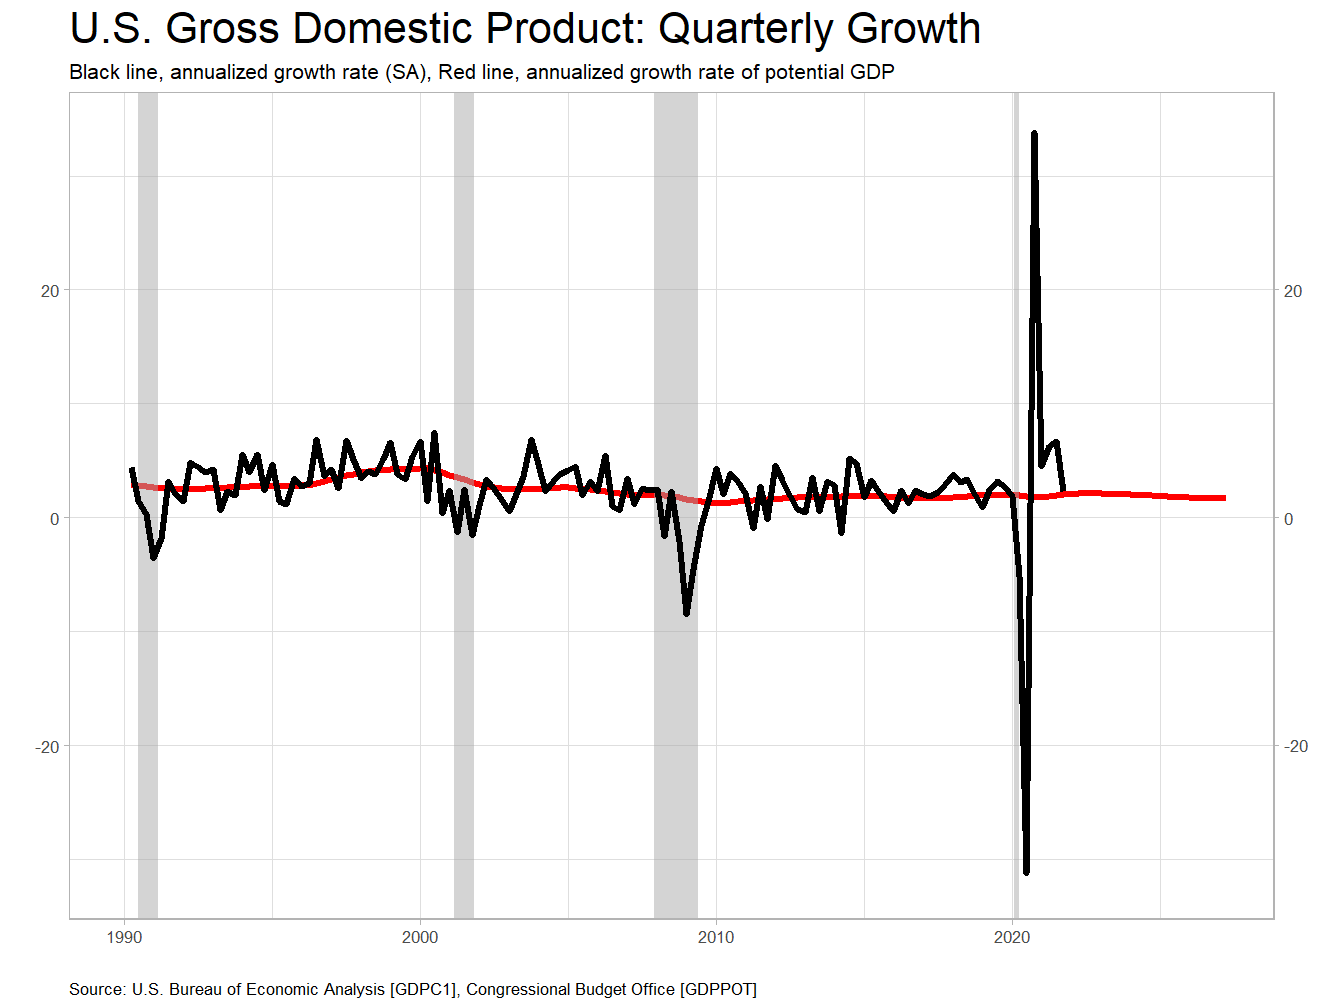 Growth Rates of Real and Potential GDP